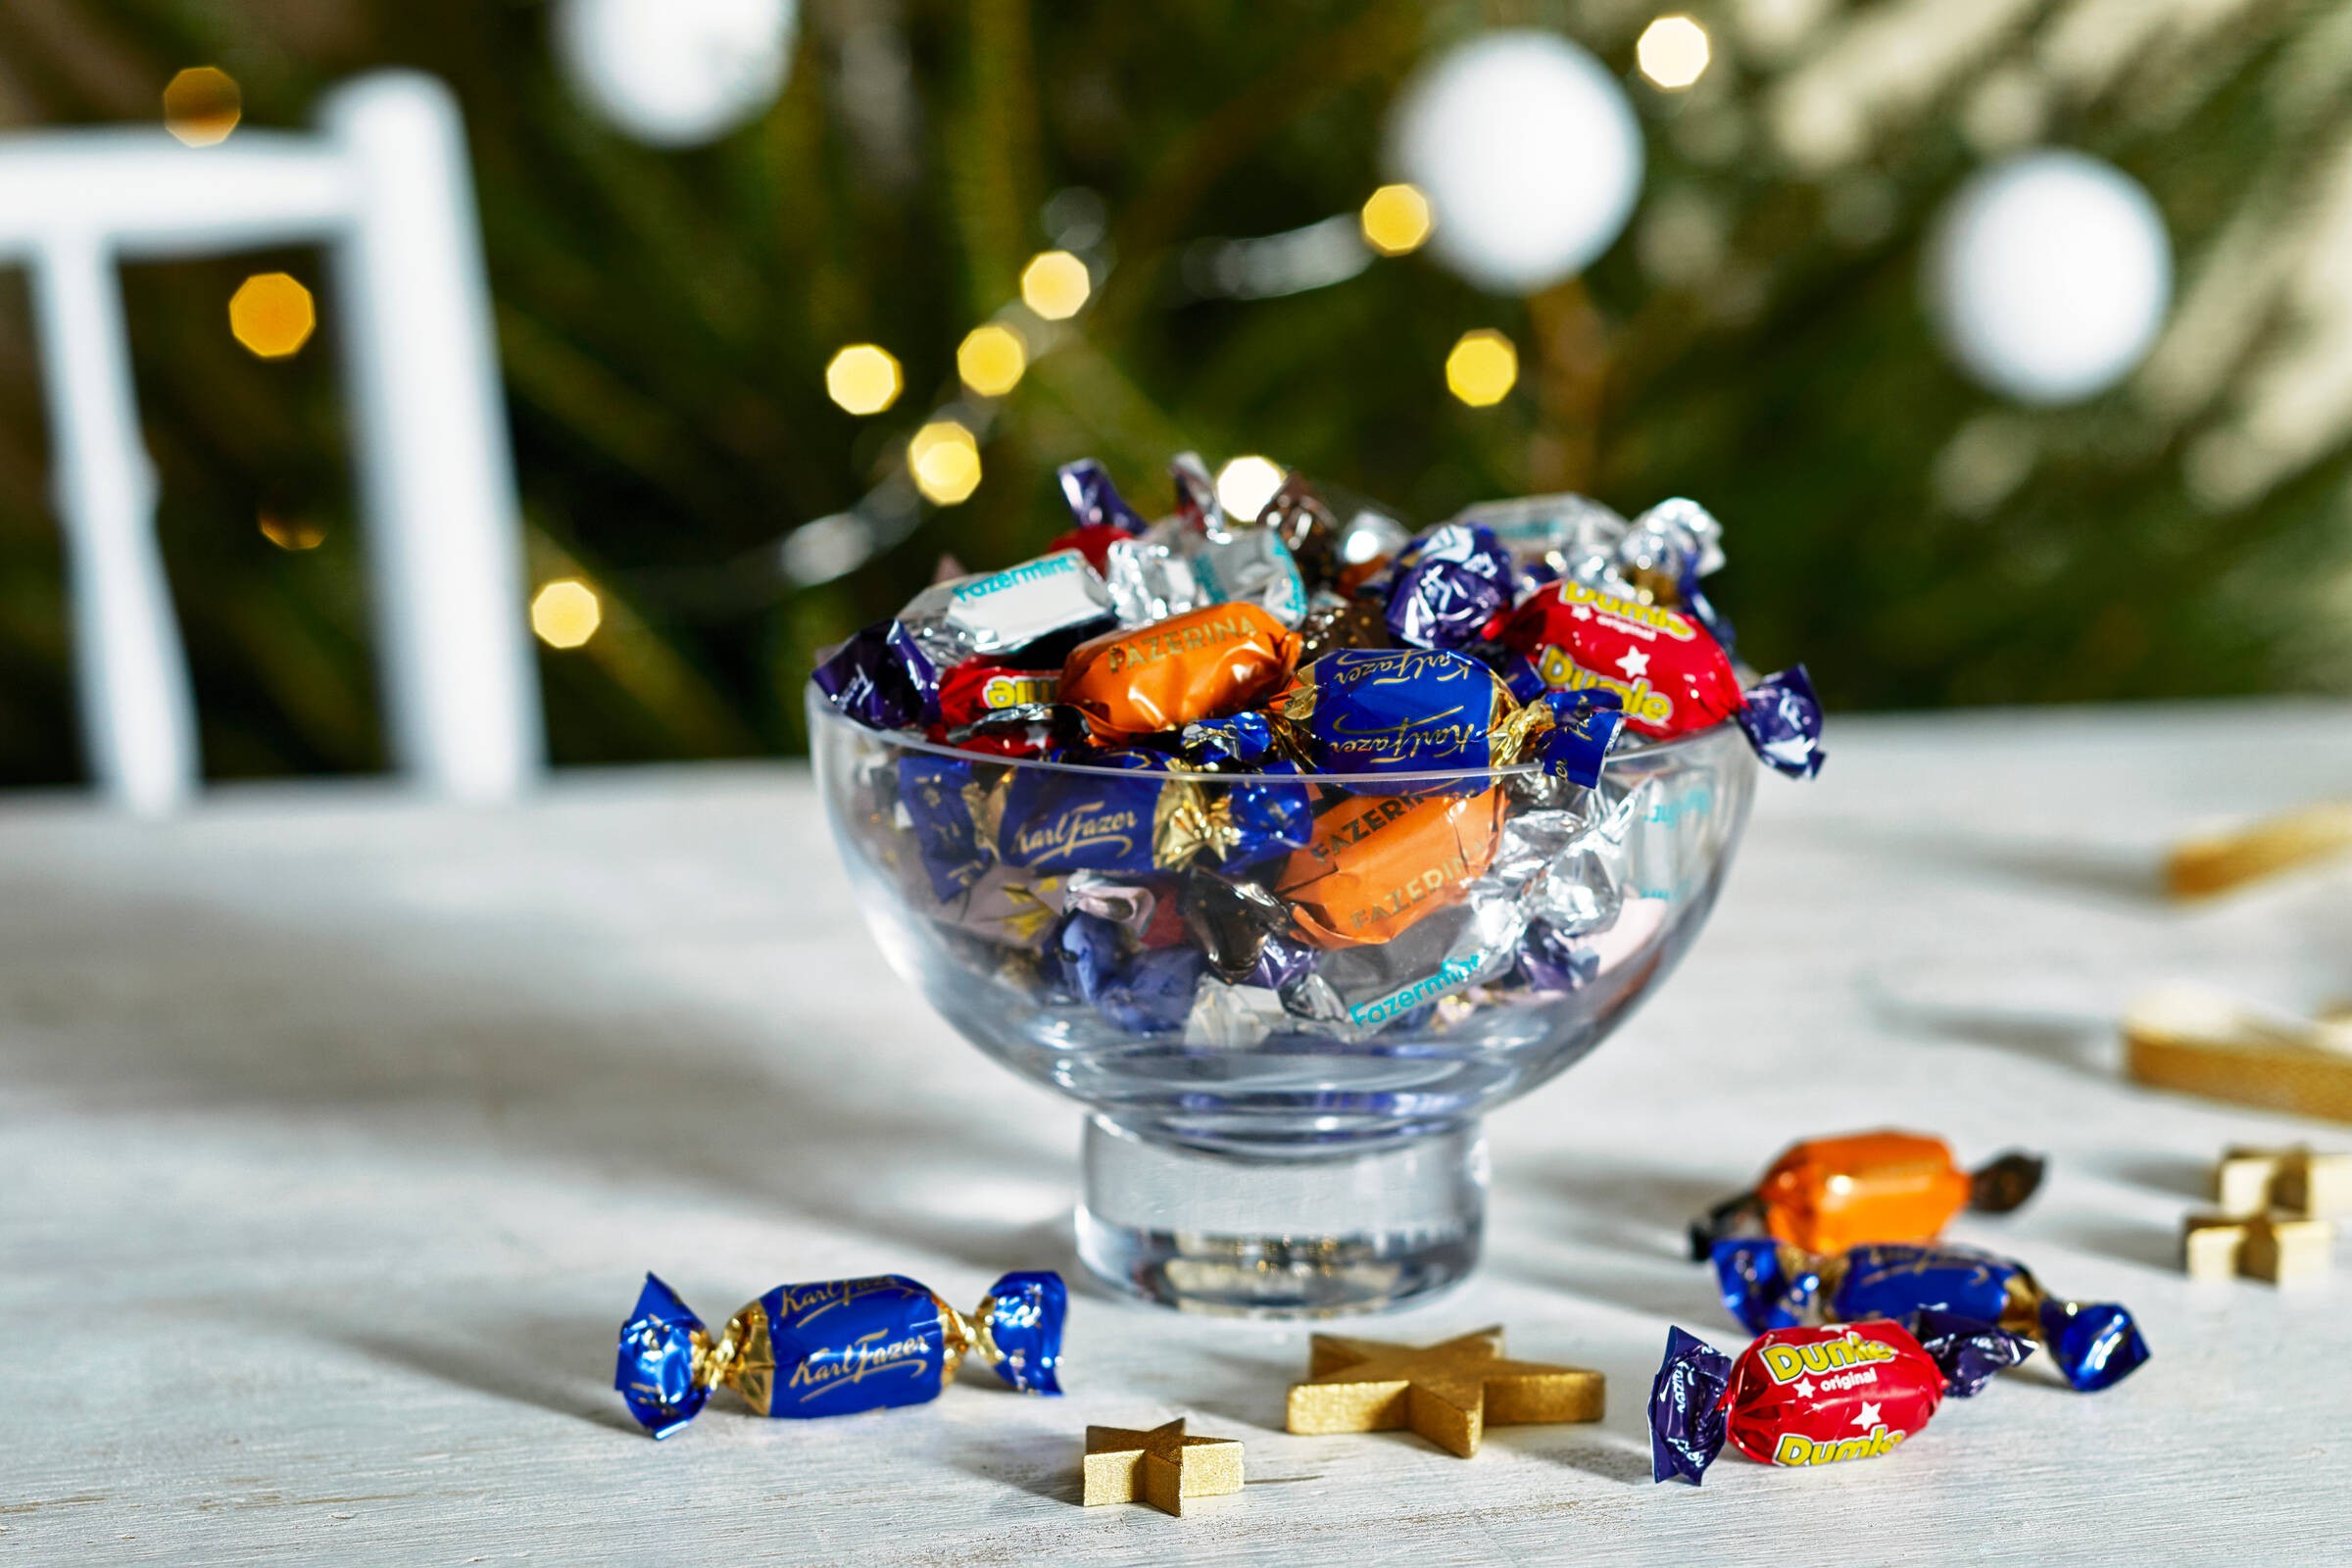 Finnish and Scandinavian Christmas delicacies and presents